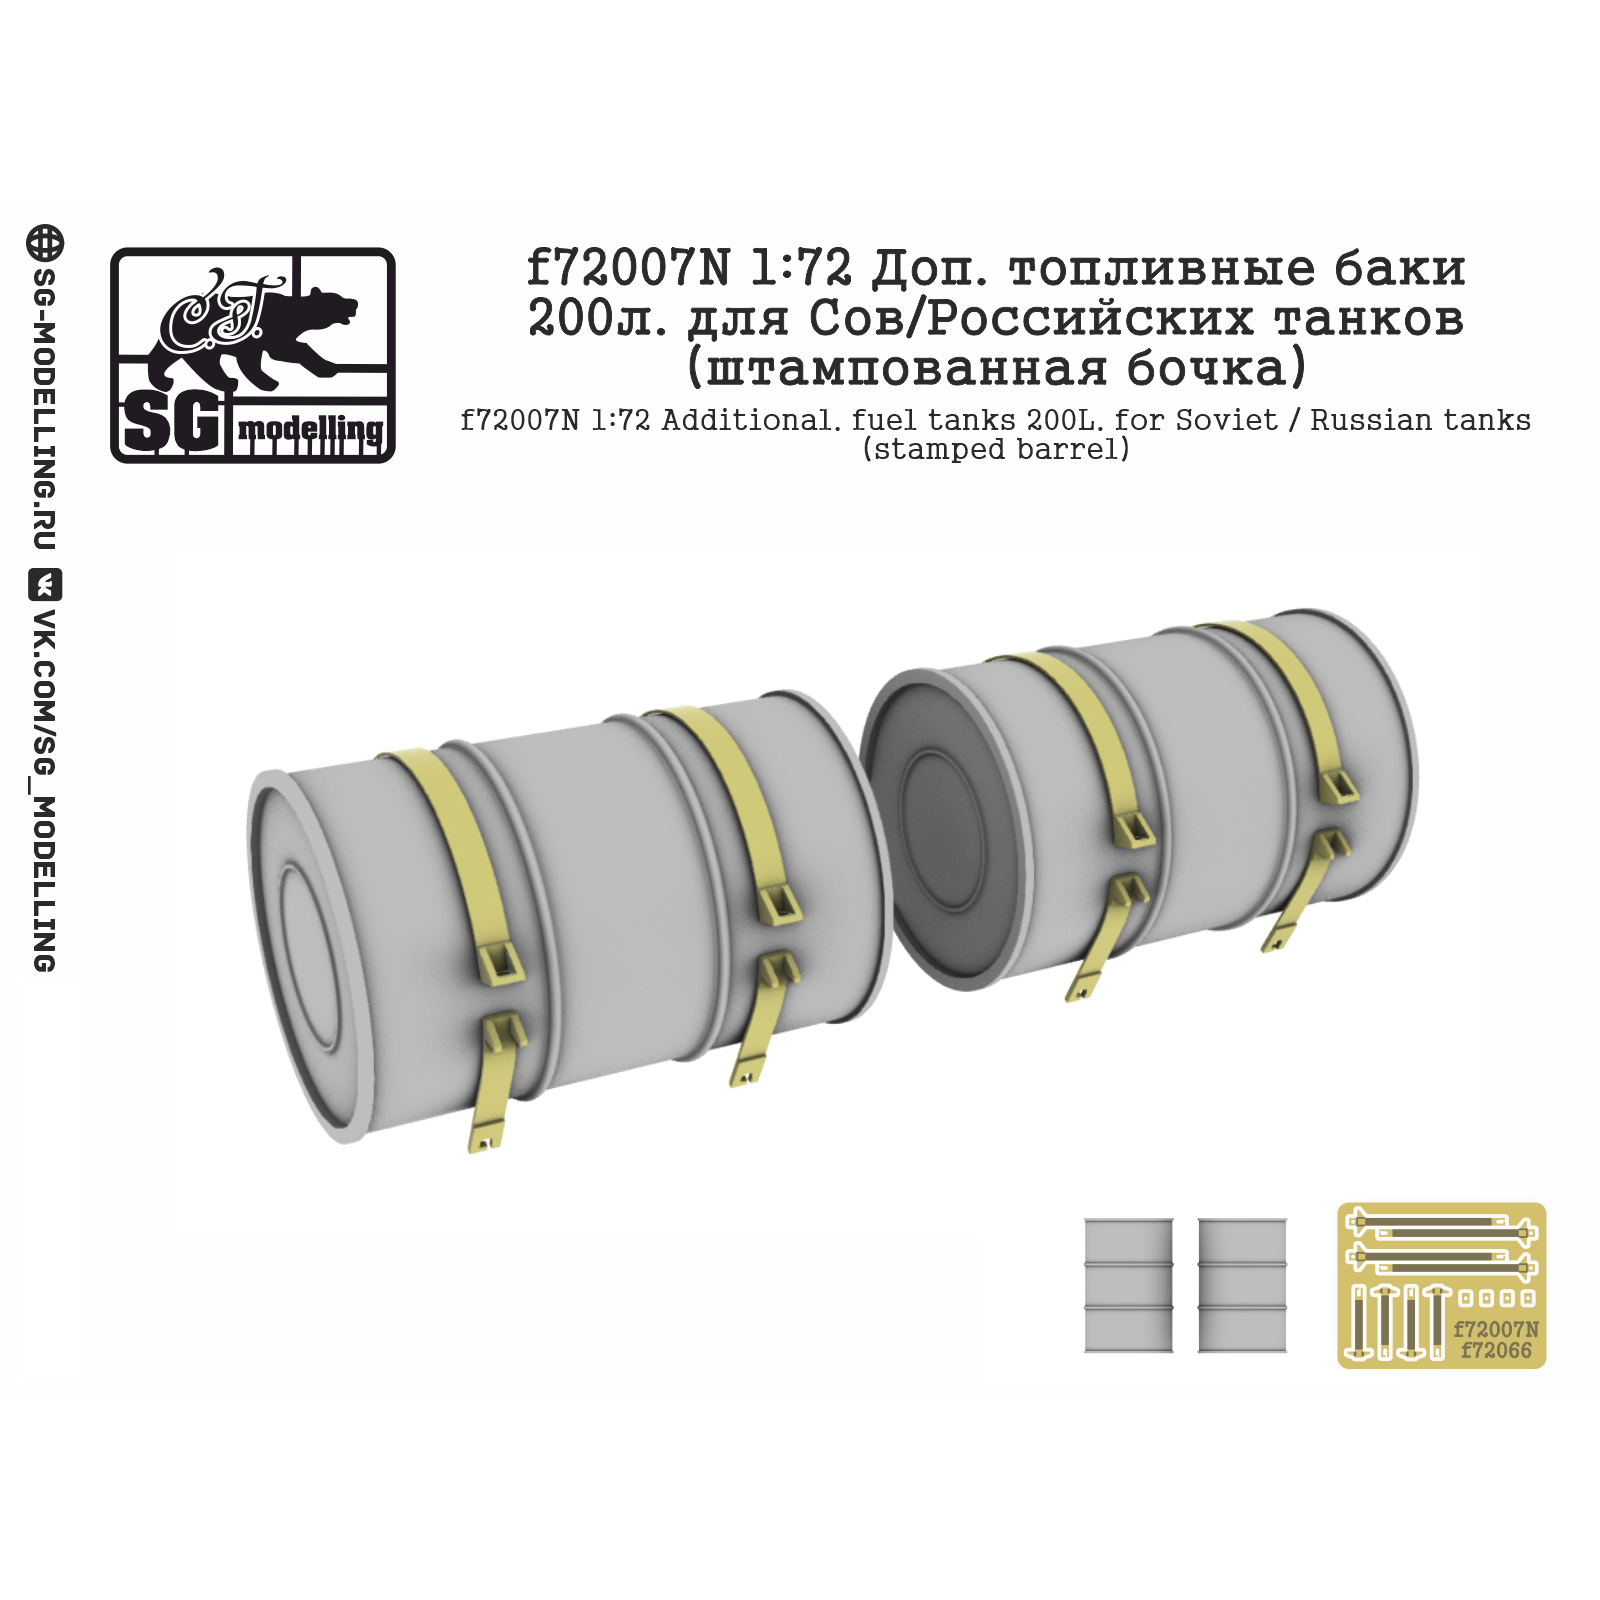 f72007N SG Modeling 1/72 Additional fuel tanks 200 l. for the Soviet/Russian tanks (stamped barrel)